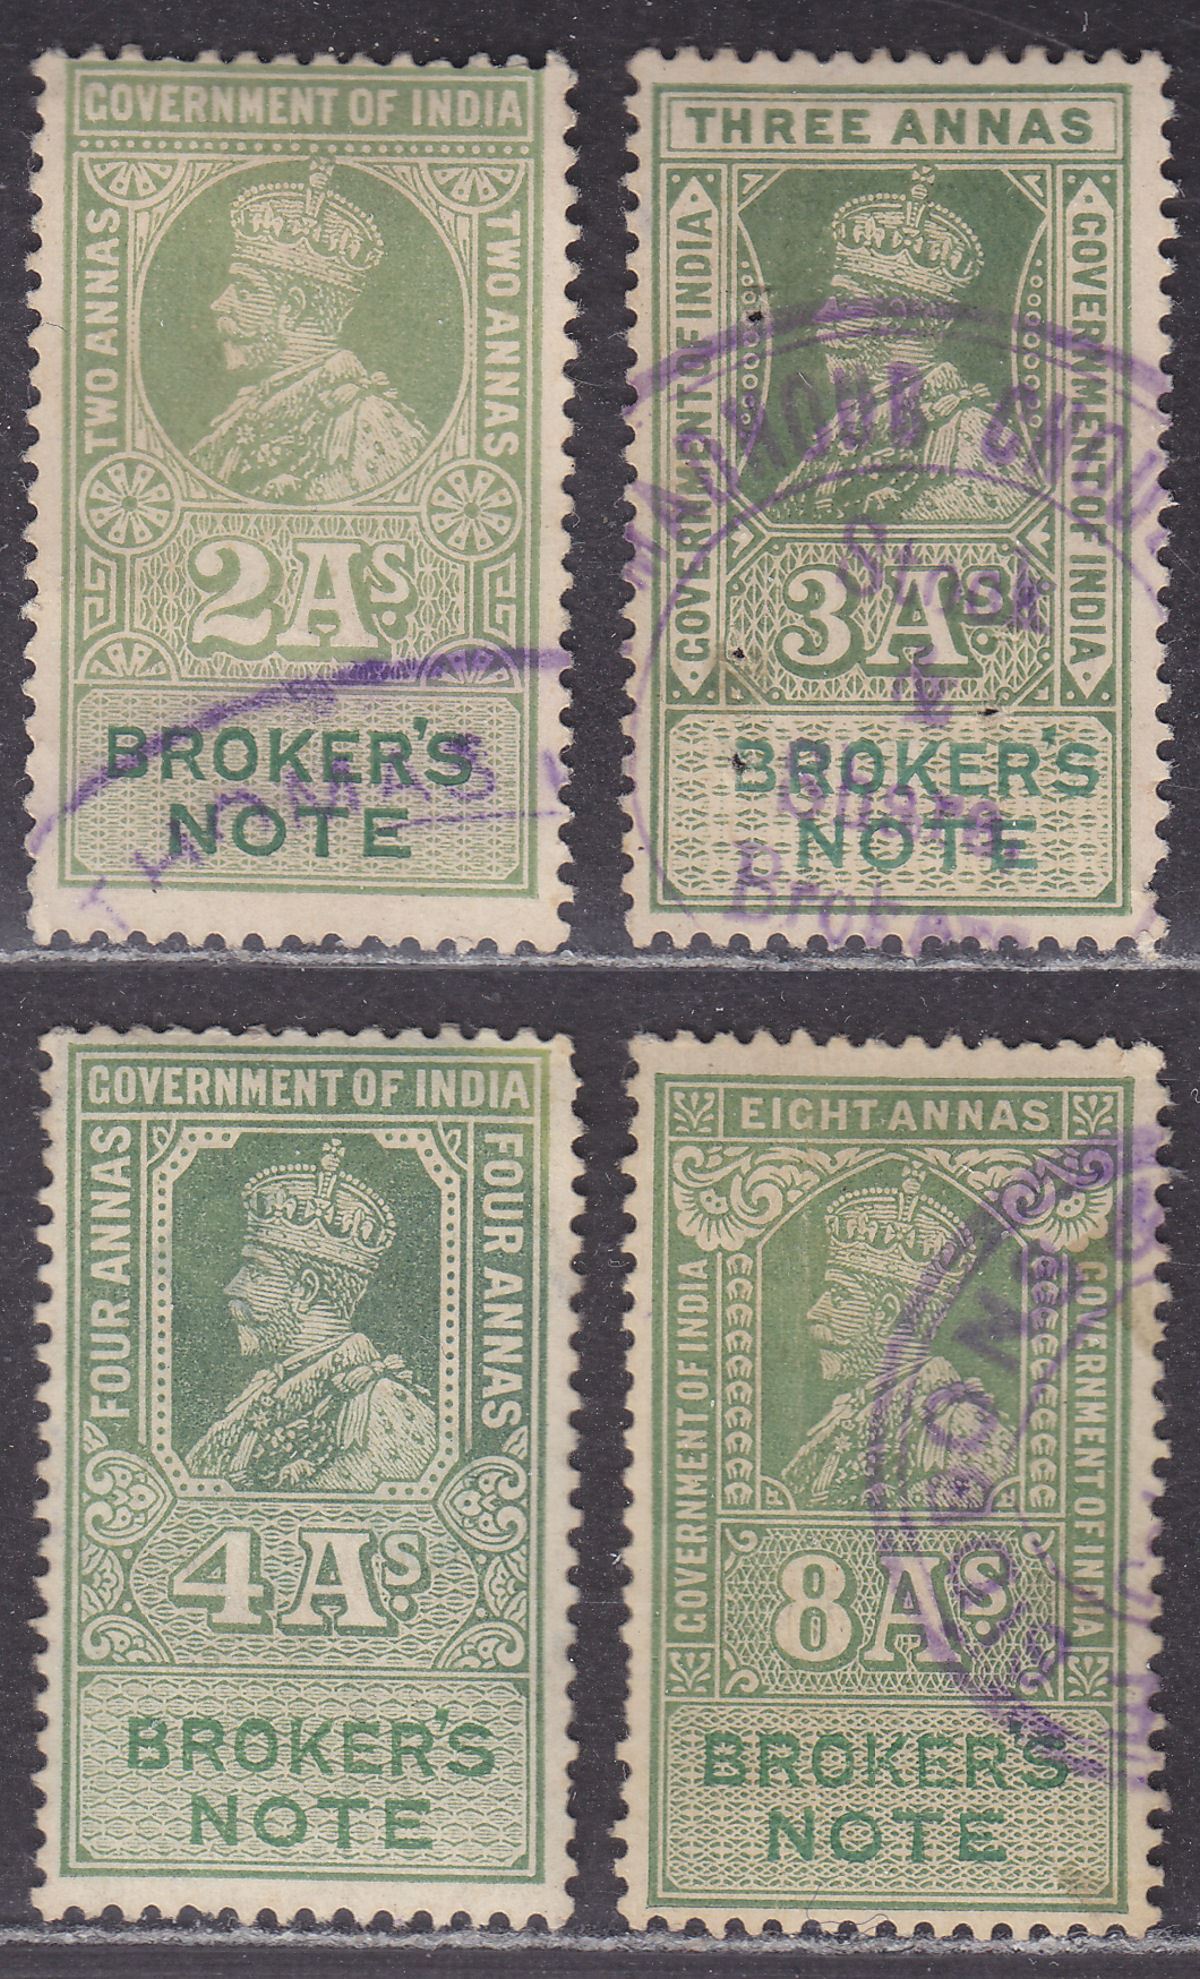 India 1923 KGV Revenue Broker's Note 2a, 3a, 4a, 8a Mostly Used